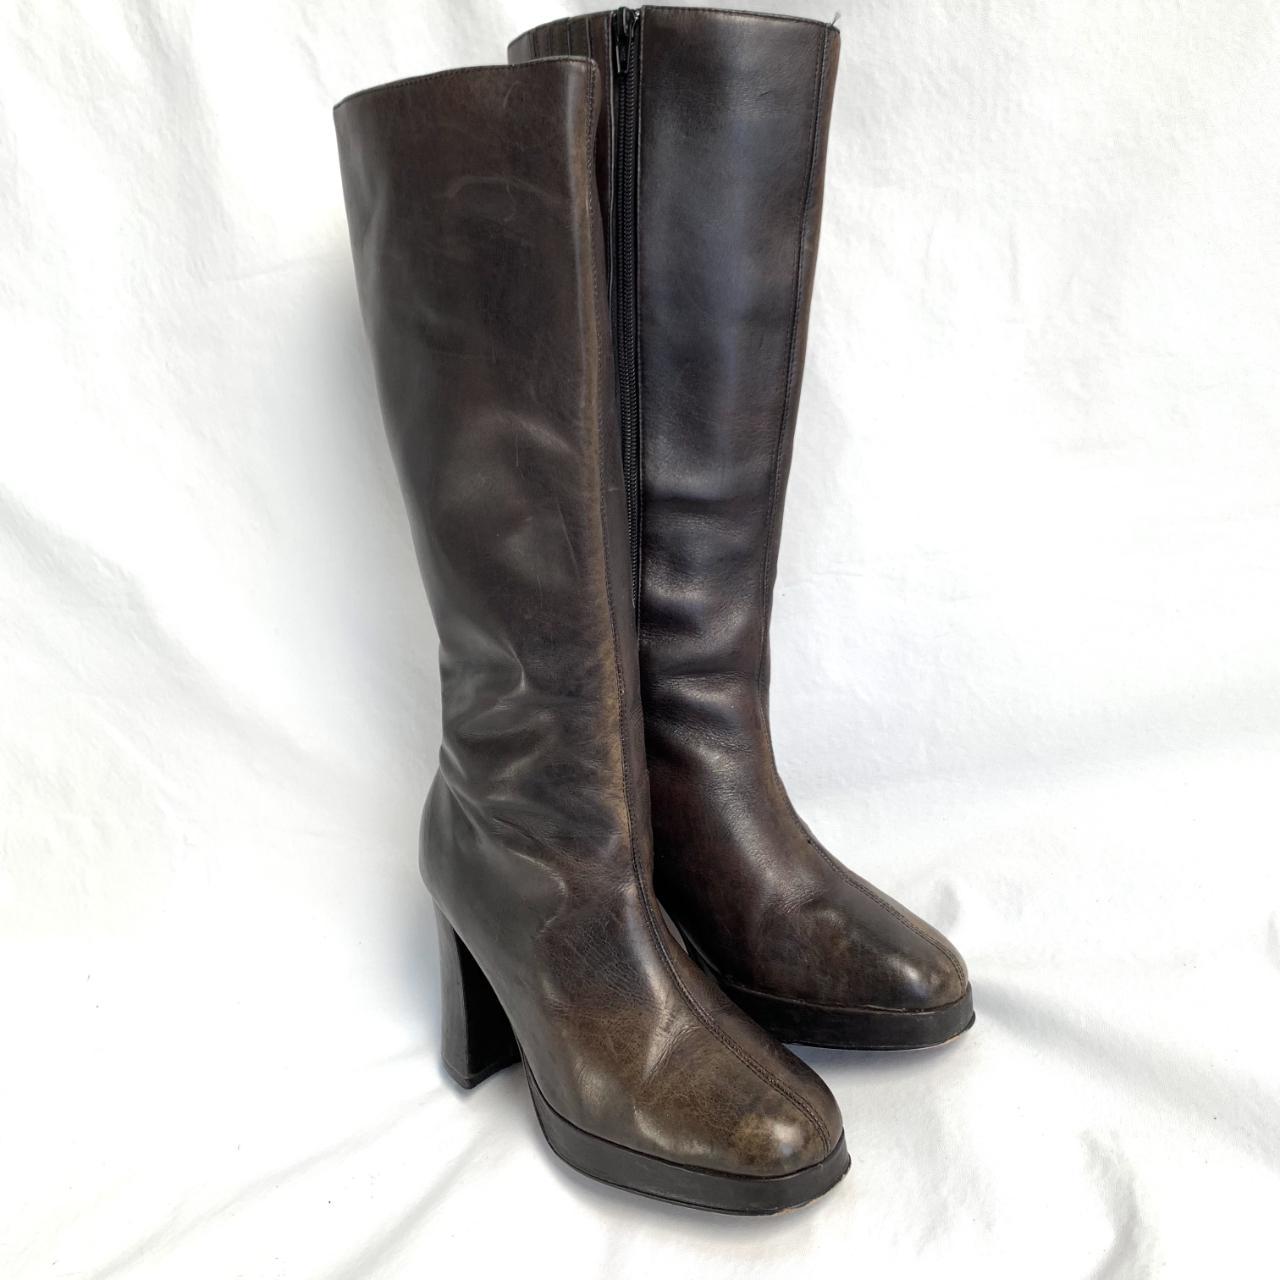 Product Image 1 - Vintage platform boots, brown and